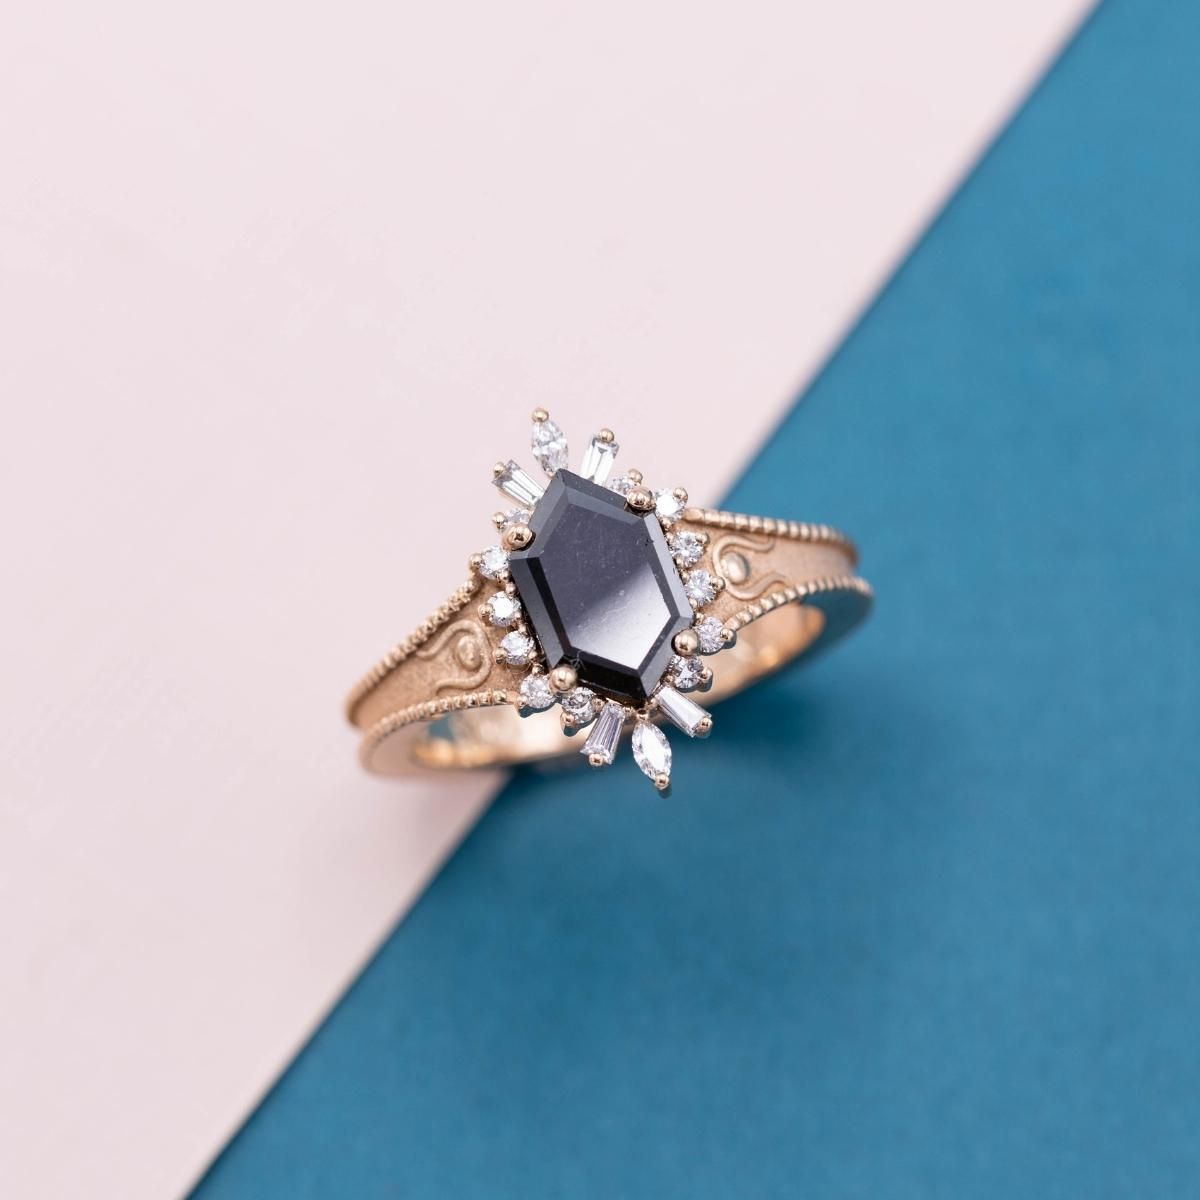 bouw Banzai Moeras Non-traditional engagement rings | CustomMade.com